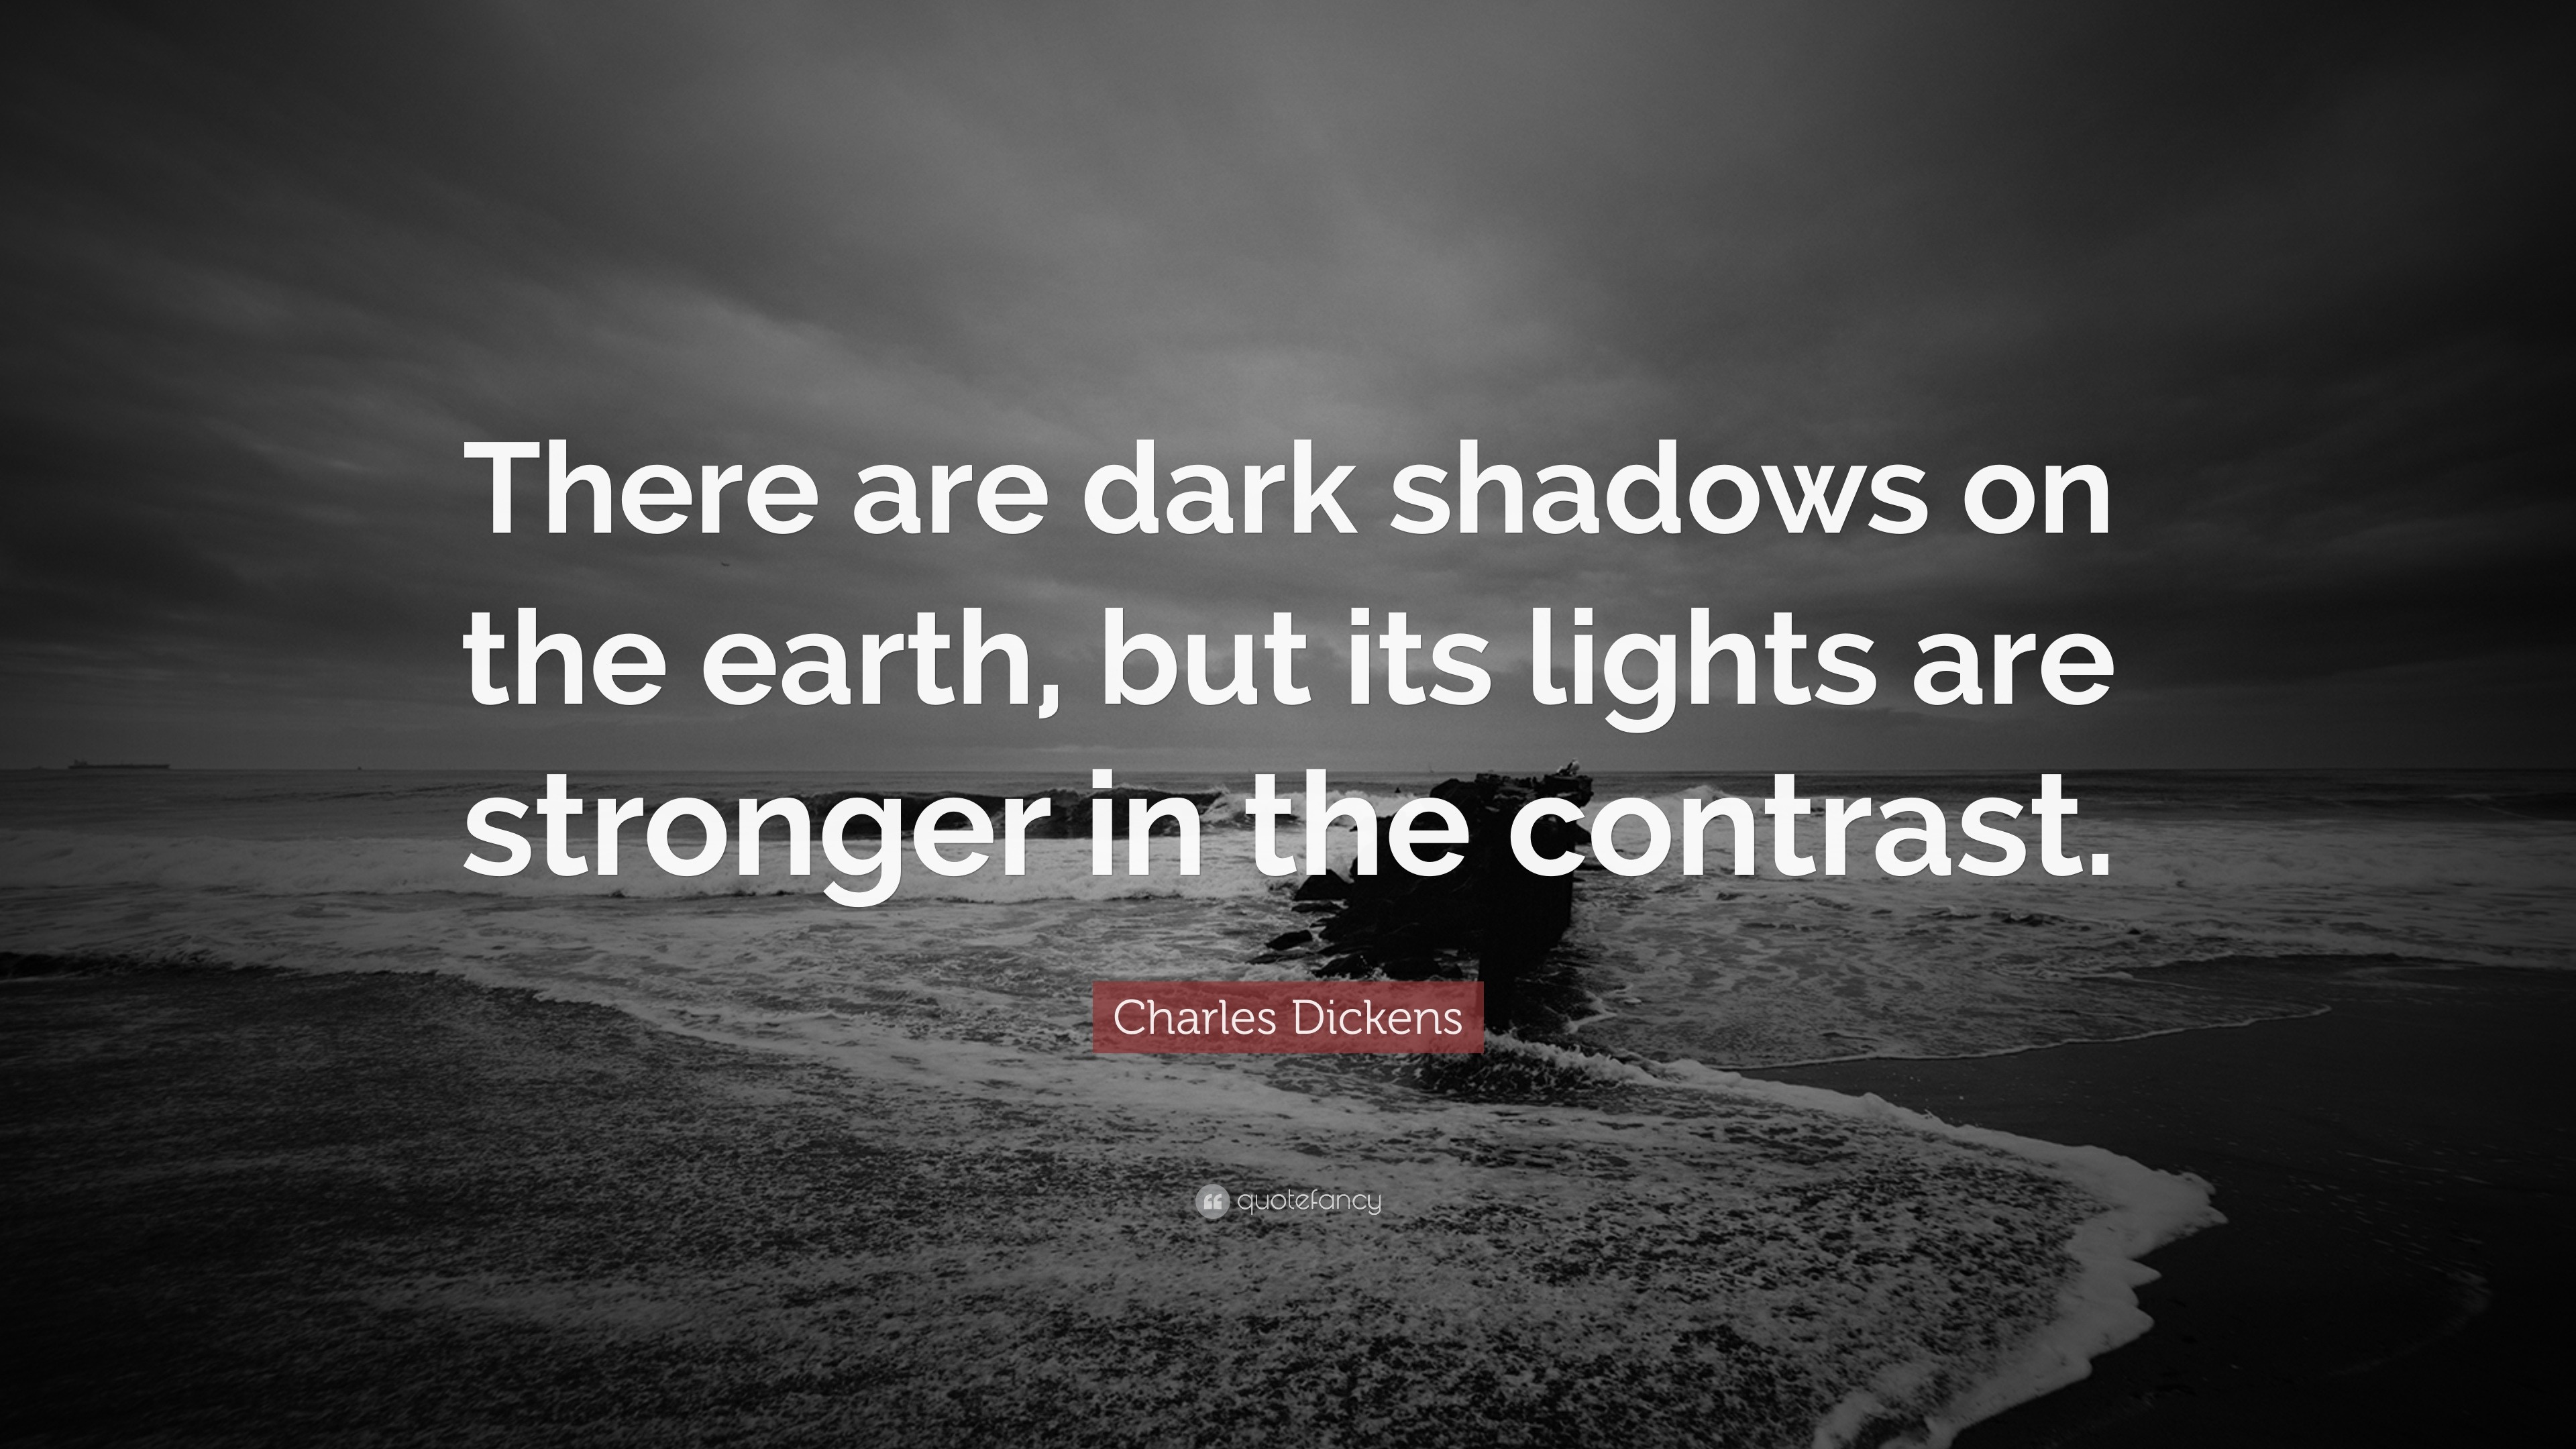 Charles Dickens Quote: “There are dark shadows on the earth, but its ...